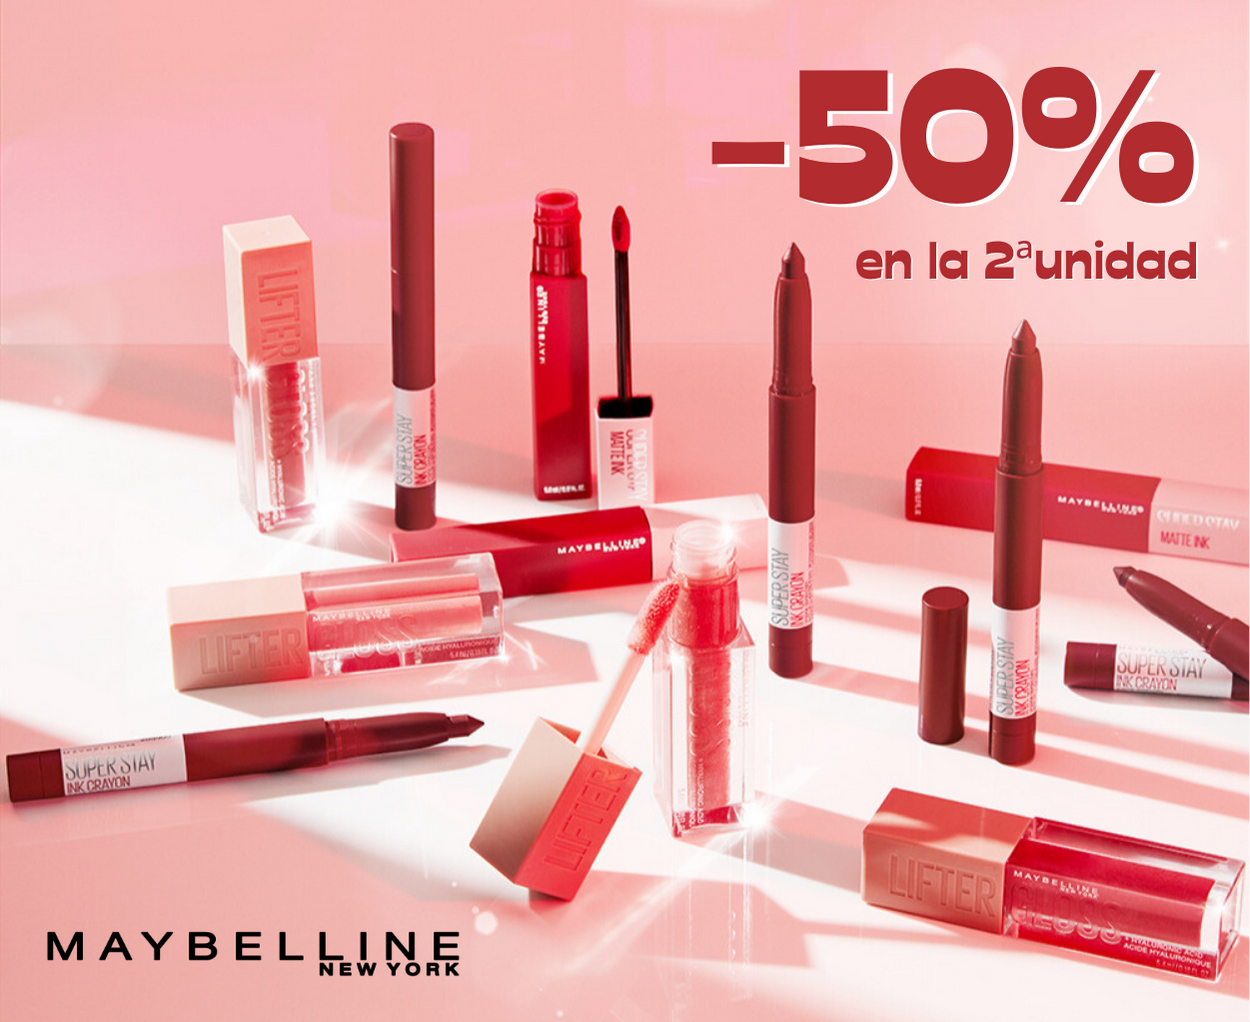 Maybelline 50 descuento